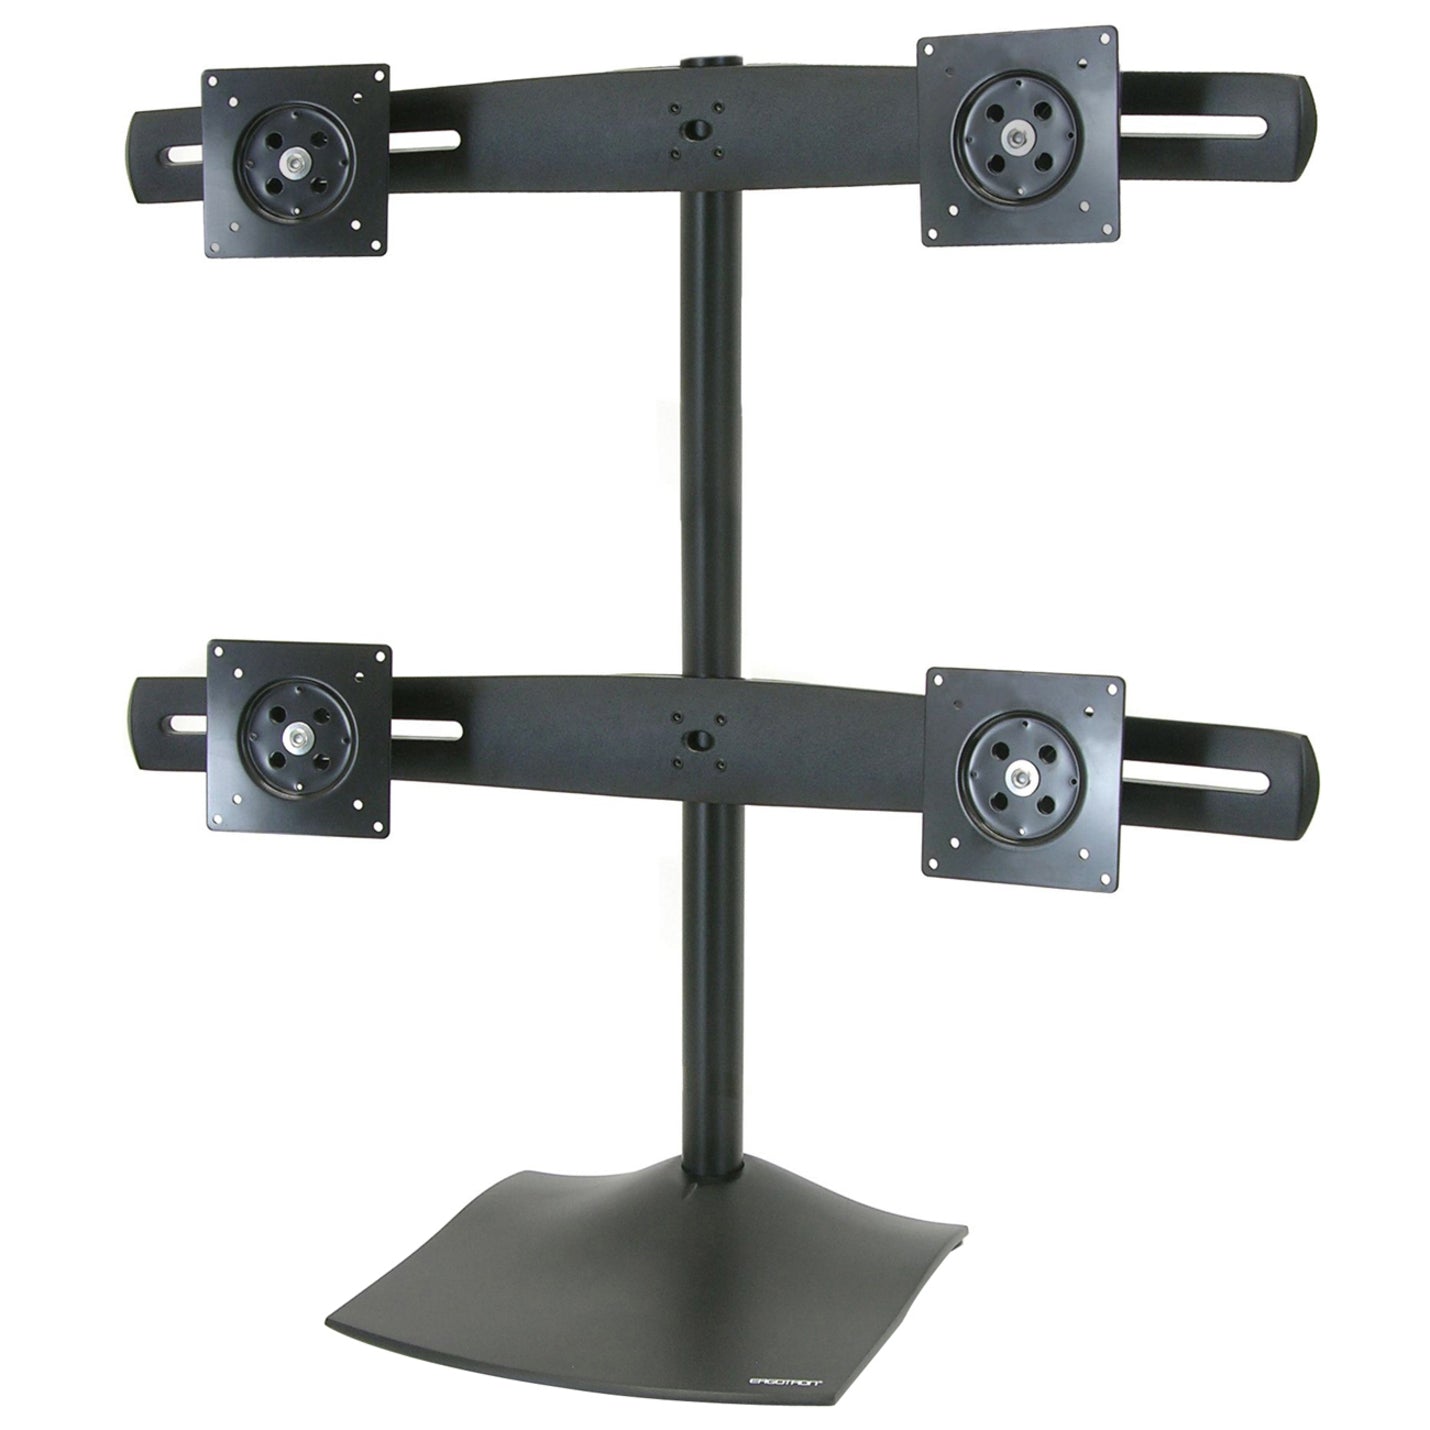 Ergotron 33-324-200 DS100 Quad-Monitor Desk Stand, Height-Adjustable Bows, Space-Saving Design, 124 lb Load Capacity